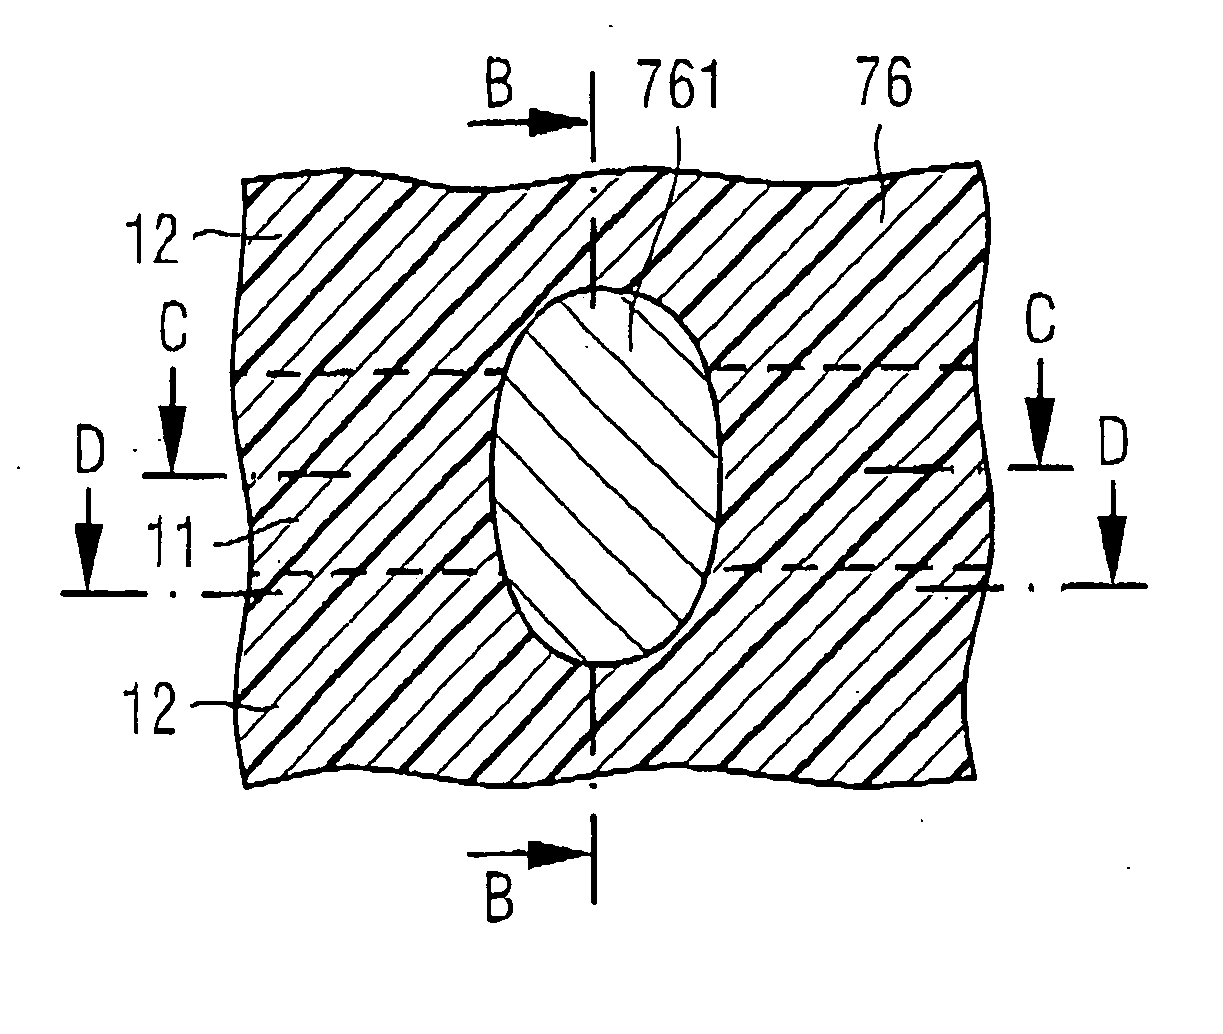 Method of manufacturing a field effect transistor device with recessed channel and corner gate device